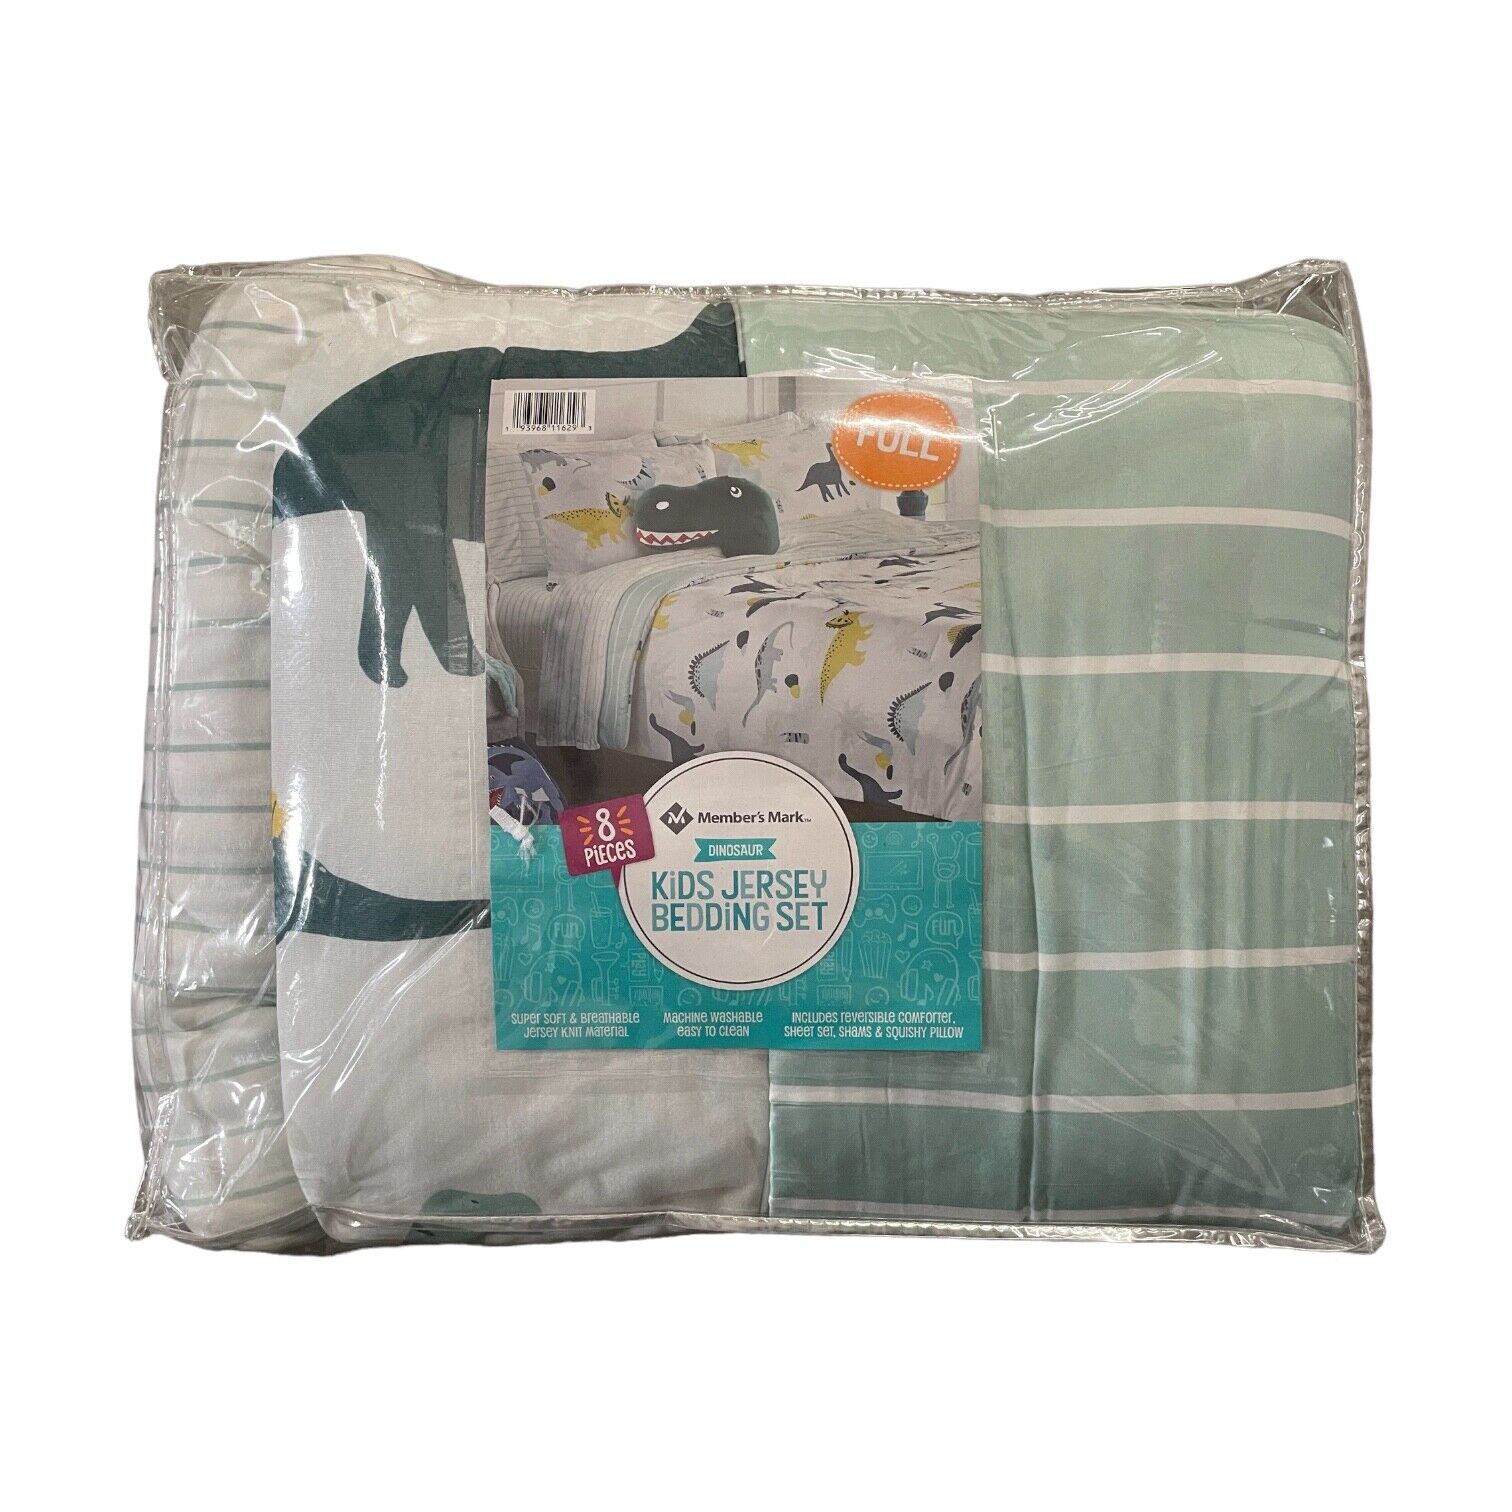 Full Dinosaur Bedding Set with 8 Pieces